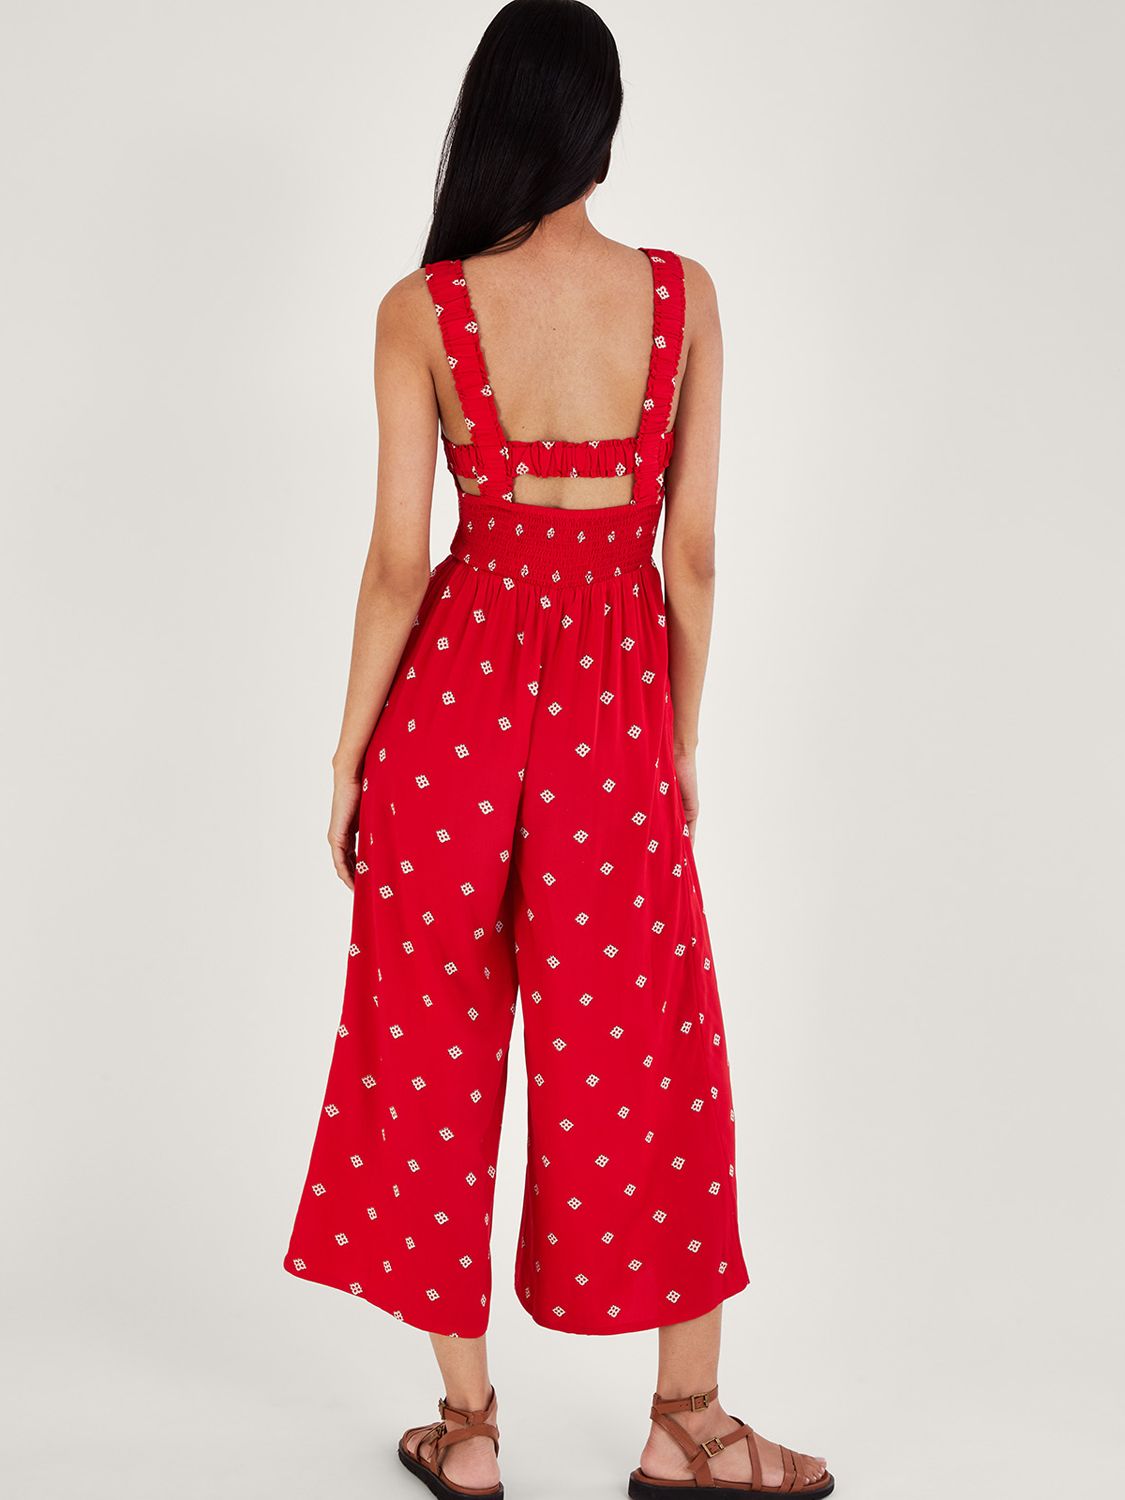 Monsoon Geometric Print Cut-Out Back Jumpsuit, Red, S